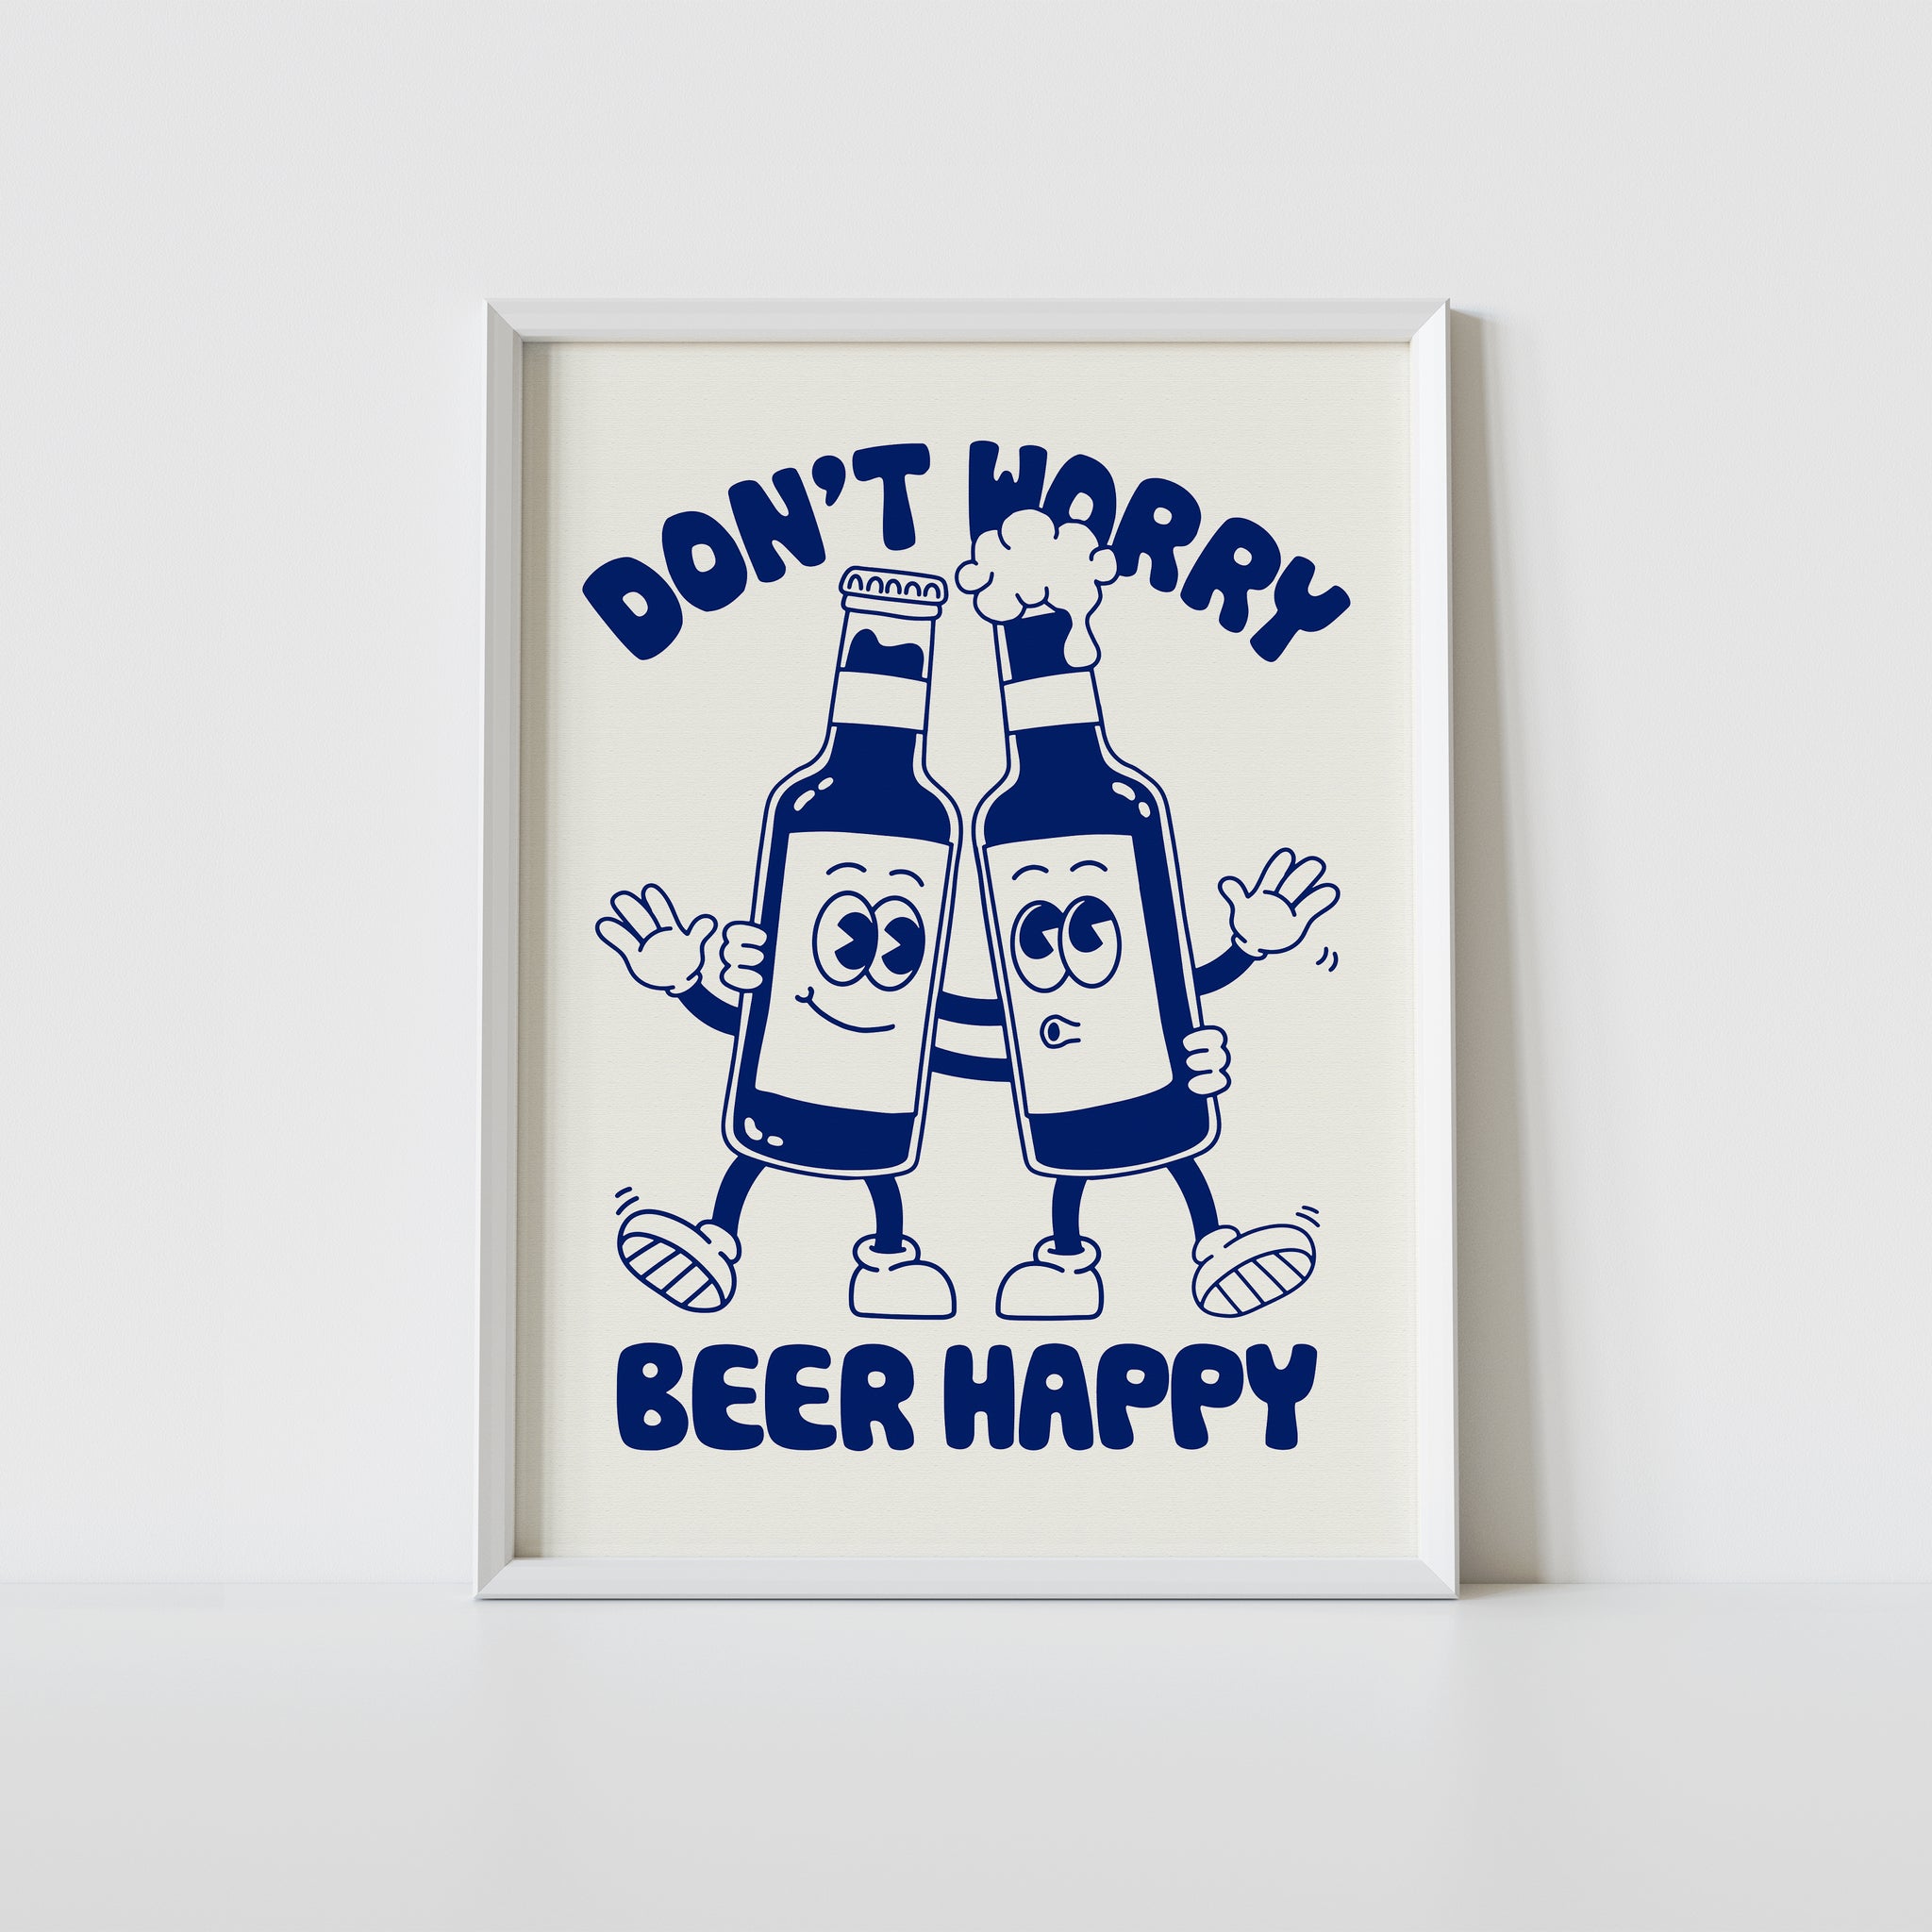 'Don't Worry Beer Happy' print